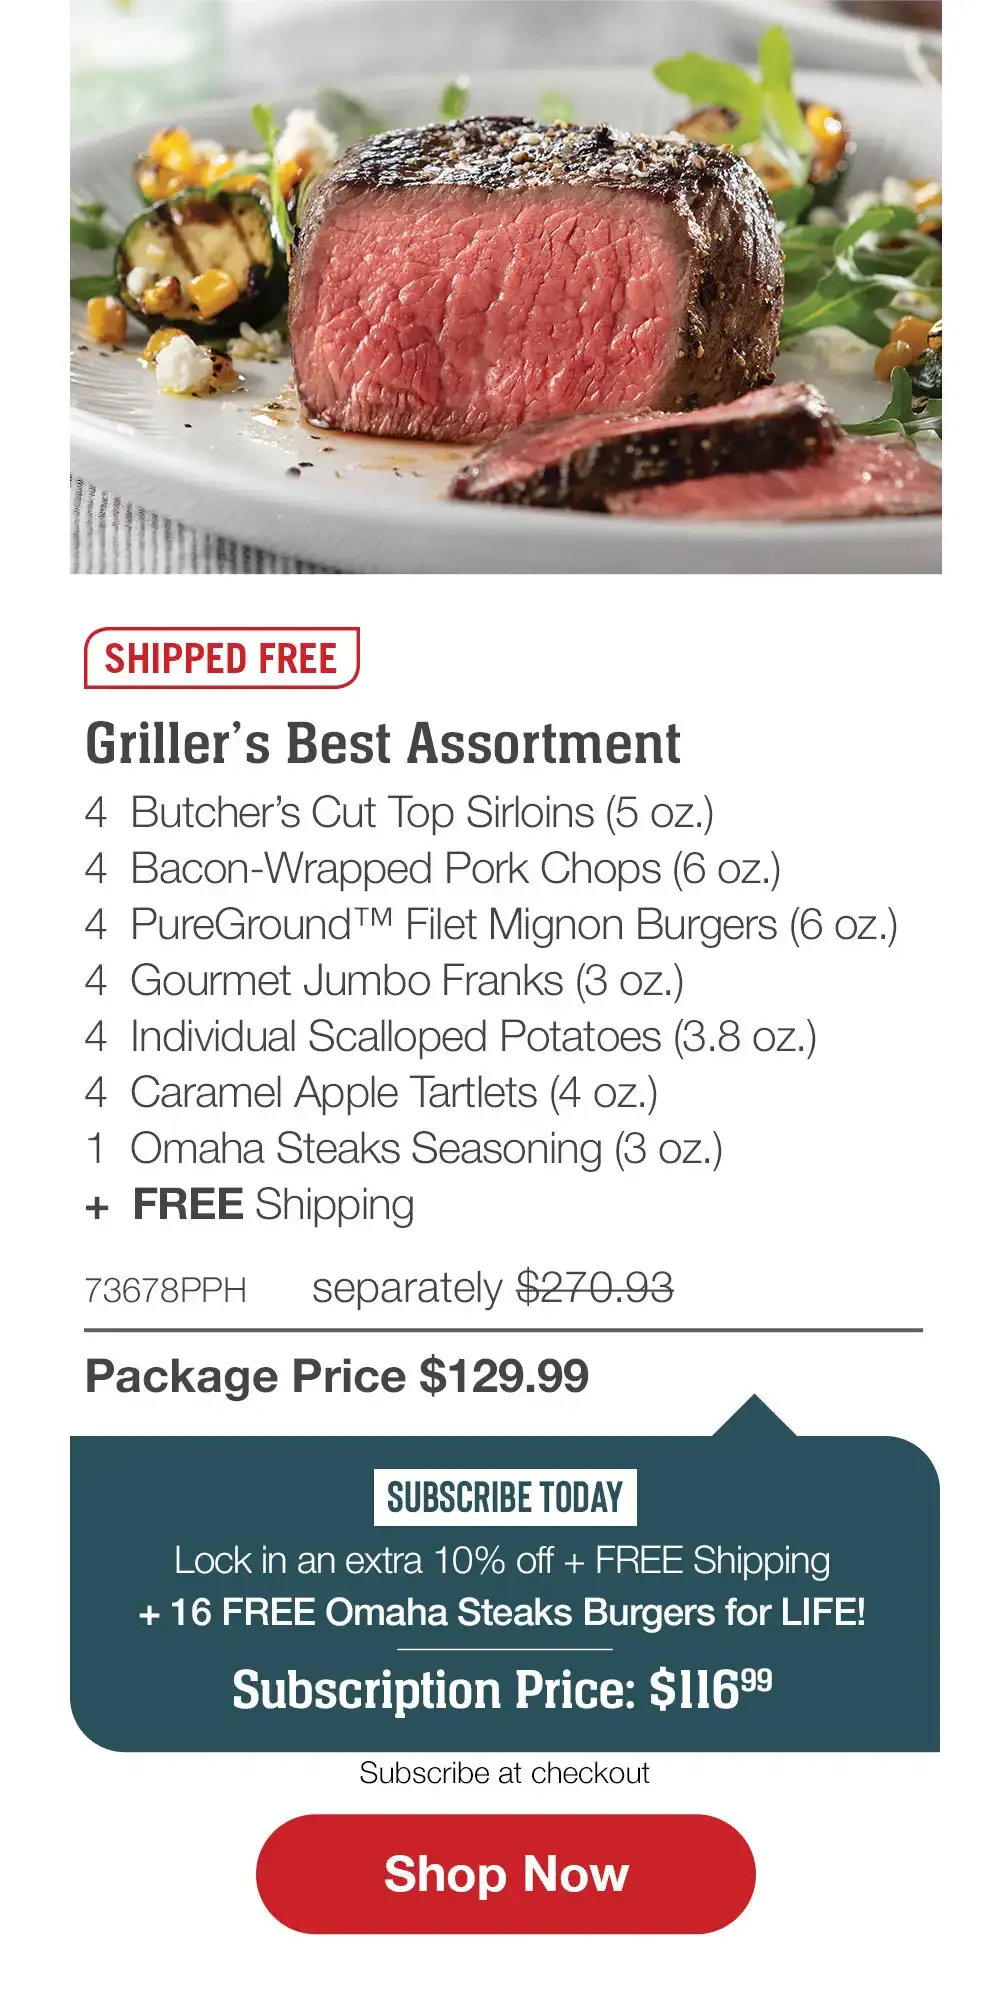 SHIPPED FREE | Griller�s Best Assortment - 4 Butcher�s Cut Top Sirloins (5 oz.) - 4 Bacon-Wrapped Pork Chops (6 oz.) - 4 PureGround� Filet Mignon Burgers (6 oz.) - 4 Gourmet Jumbo Franks (3 oz.) - 4 Individual Scalloped Potatoes (3.8 oz.) - 4 Caramel Apple Tartlets (4 oz.) - 1 Omaha Steaks Seasoning (3 oz.) + FREE Shipping - 73678PPH separately \\$270.93 | Package Price \\$129.99 | SUBSCRIBE TODAY - Lock in an extra 10% off + FREE Shipping + 16 FREE Omaha Steaks Burgers for LIFE! Subscription Price: \\$116.99 || SHOP NOW